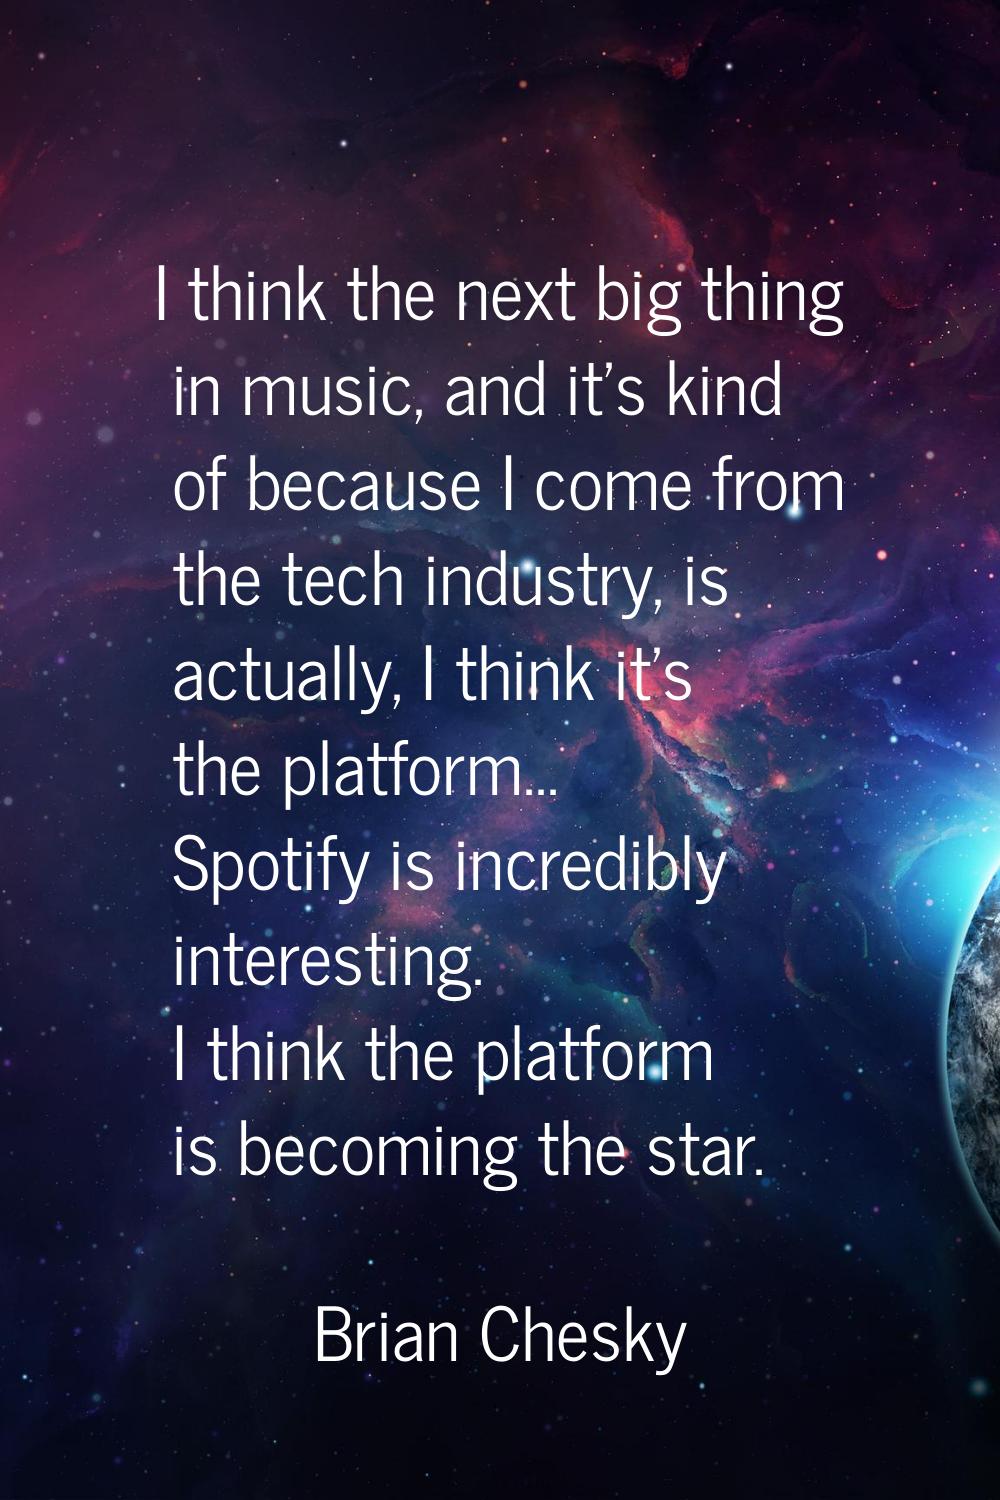 I think the next big thing in music, and it's kind of because I come from the tech industry, is act